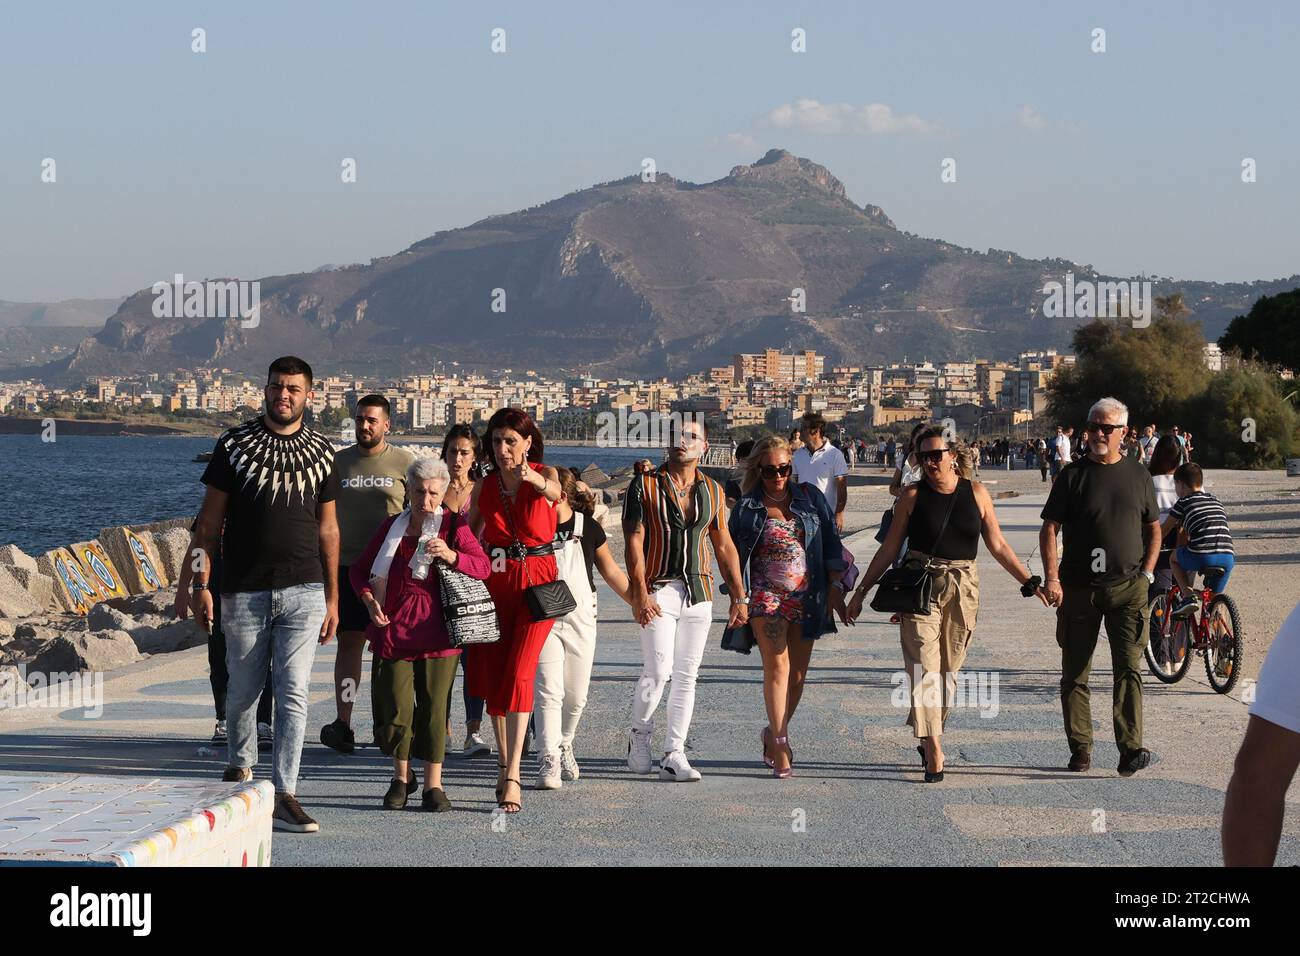 Pedestrians stroll along the promenade on the seafront at Palermo, Sicily Stock Photo